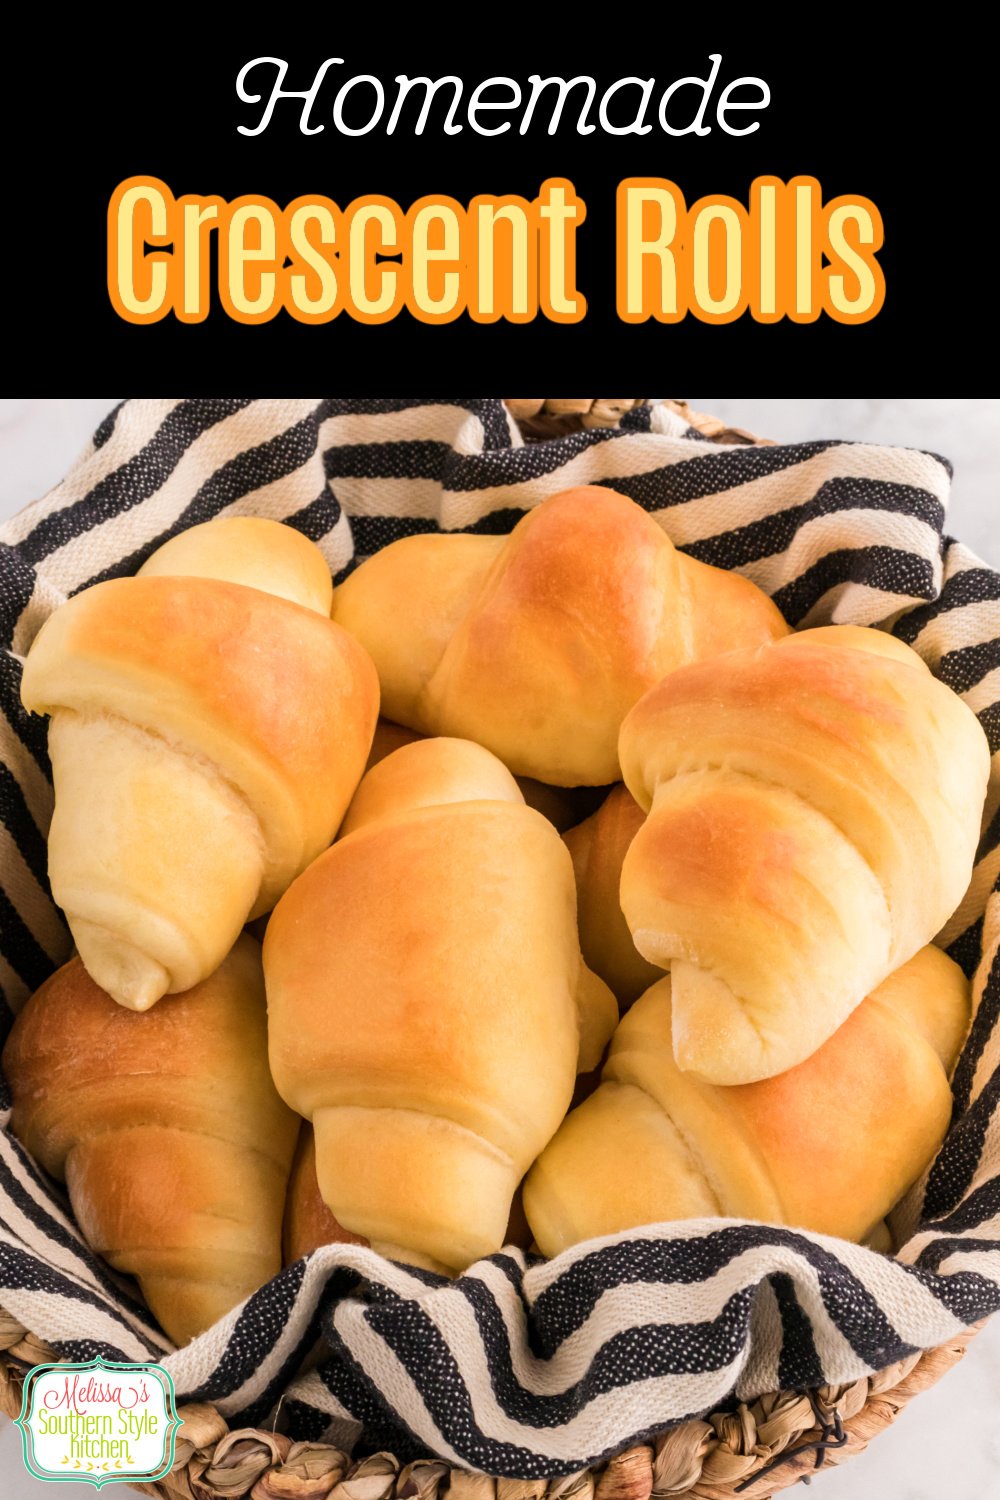 These soft and fluffy Crescent Rolls melt in your mouth served straight from the oven with butter and a drizzle of honey #crescentrolls #homemadebread #breadrecipes #crescentrollrecipes #homemadecrescentrolls